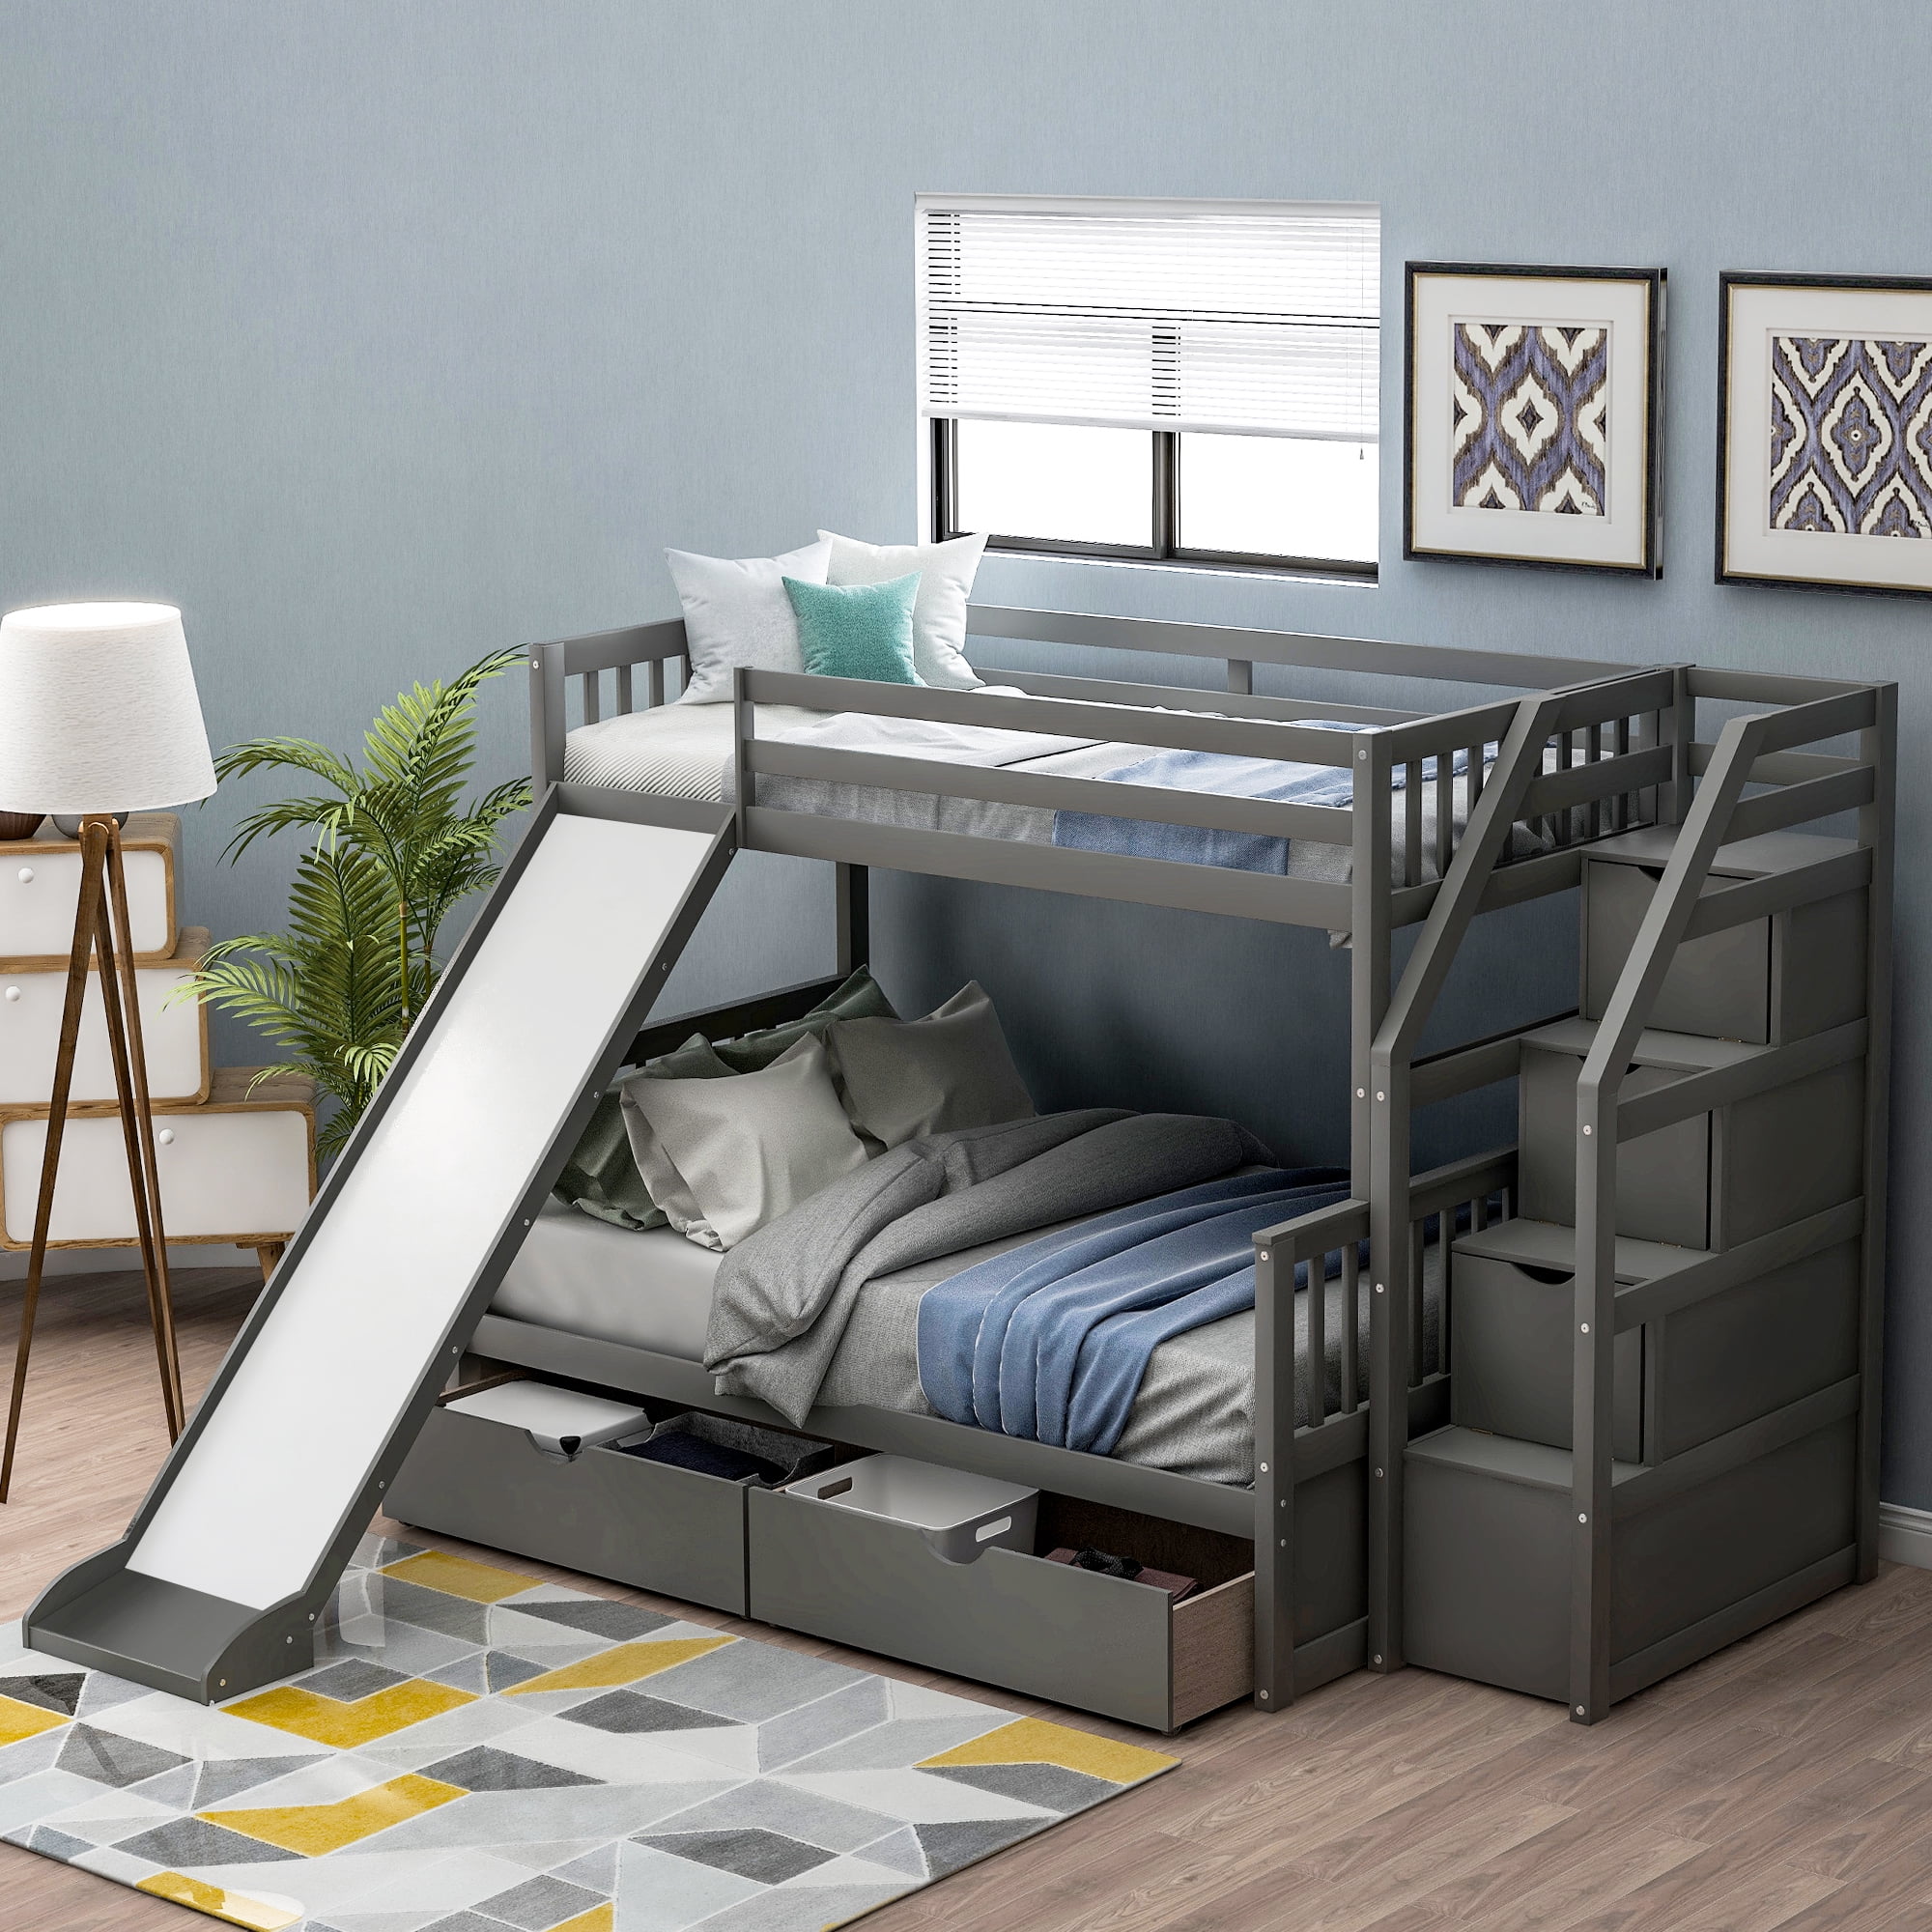 Acme Furniture Jason Twin Over Full, Acme Jason Bunk Bed With Stairs